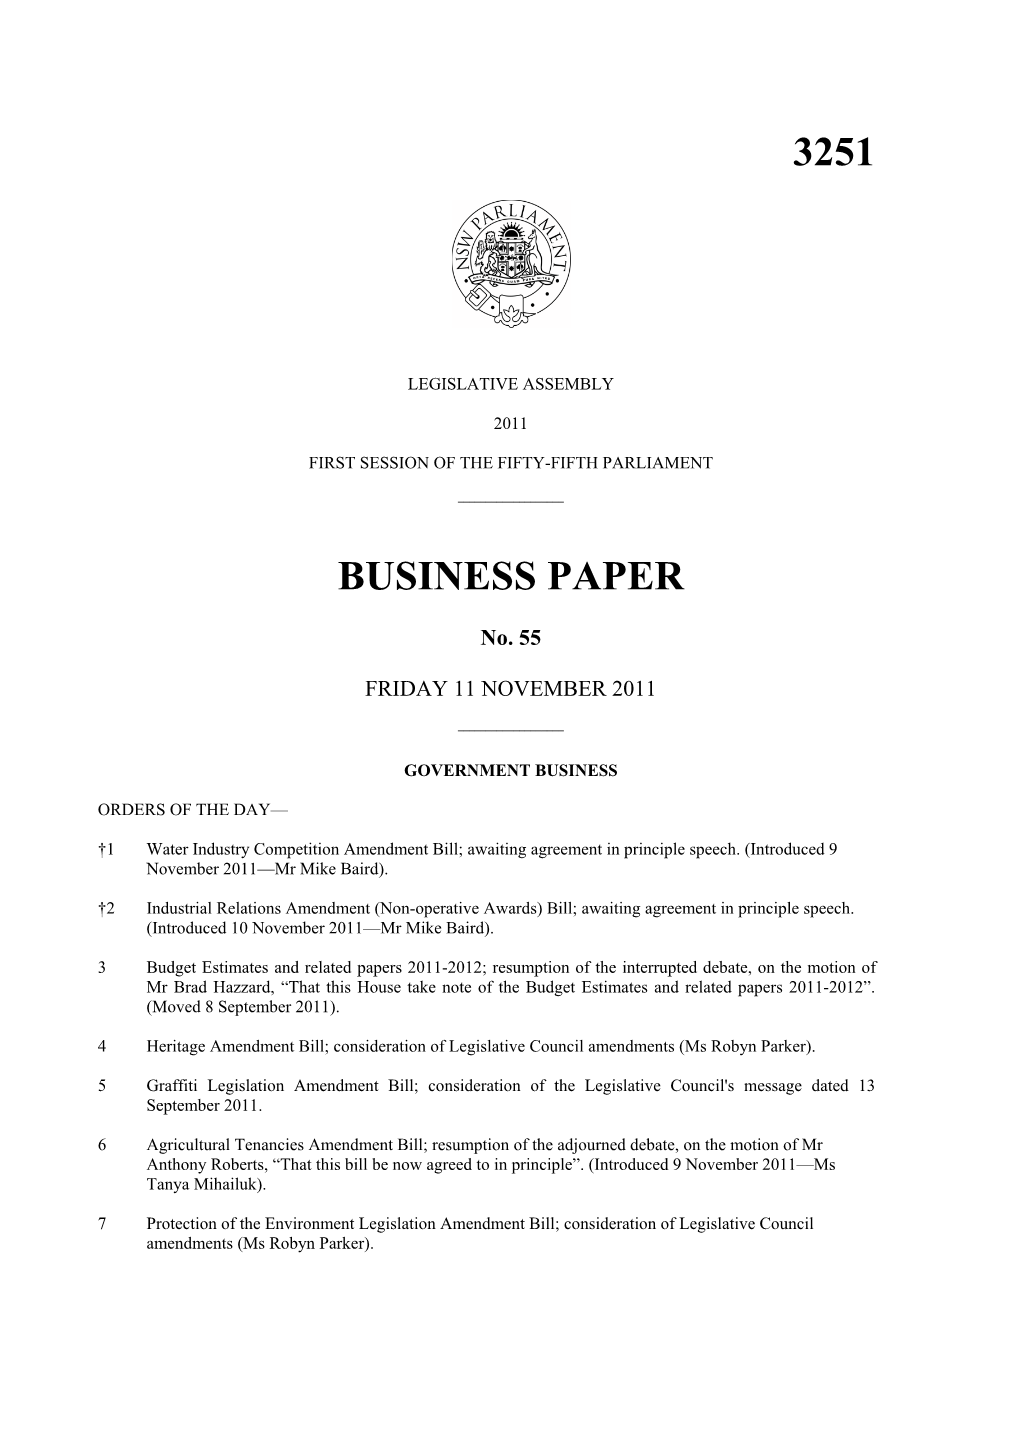 3251 Business Paper